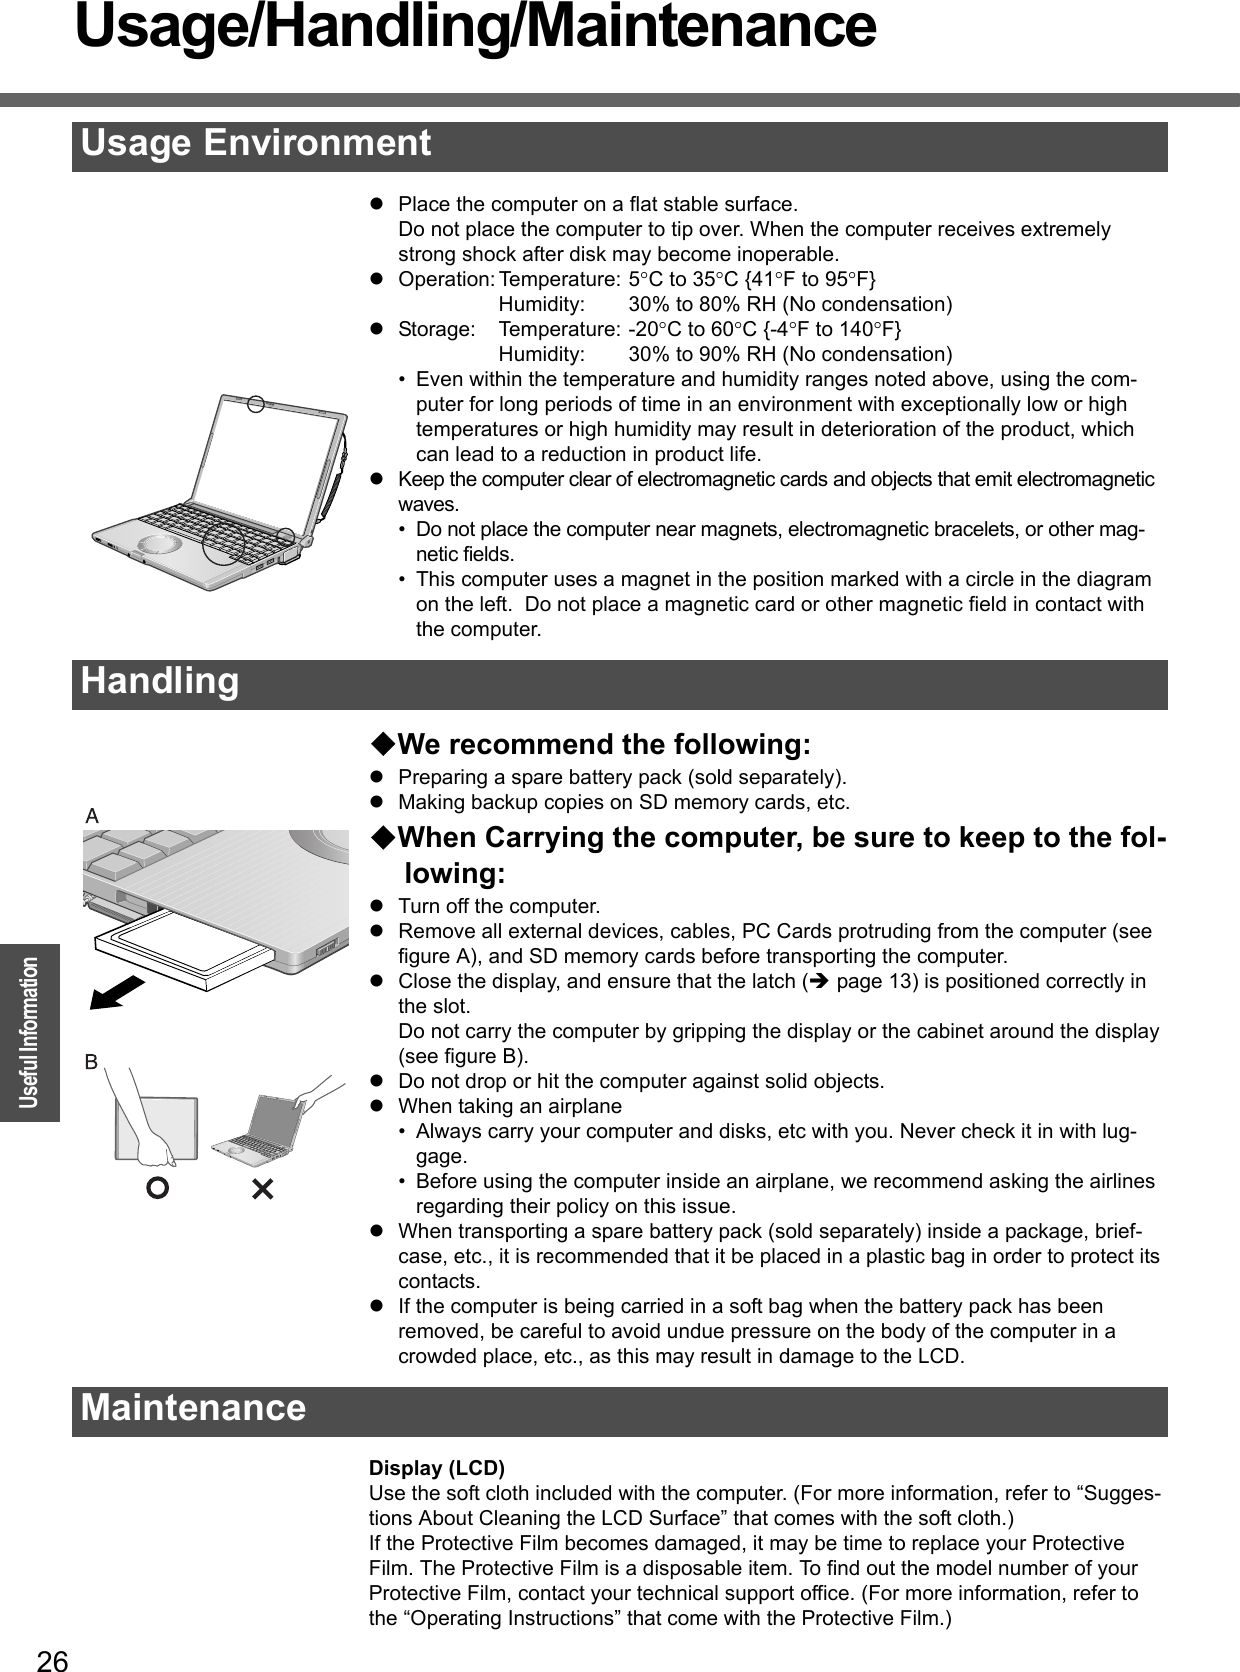 26OperationUseful InformationUsage/Handling/MaintenancezPlace the computer on a flat stable surface.Do not place the computer to tip over. When the computer receives extremely strong shock after disk may become inoperable.zOperation: Temperature: 5°C to 35°C {41°F to 95°F}Humidity: 30% to 80% RH (No condensation)zStorage: Temperature: -20°C to 60°C {-4°F to 140°F}Humidity: 30% to 90% RH (No condensation)• Even within the temperature and humidity ranges noted above, using the com-puter for long periods of time in an environment with exceptionally low or high temperatures or high humidity may result in deterioration of the product, which can lead to a reduction in product life.zKeep the computer clear of electromagnetic cards and objects that emit electromagnetic waves.• Do not place the computer near magnets, electromagnetic bracelets, or other mag-netic fields.• This computer uses a magnet in the position marked with a circle in the diagram on the left.  Do not place a magnetic card or other magnetic field in contact with the computer.We recommend the following:zPreparing a spare battery pack (sold separately).zMaking backup copies on SD memory cards, etc. When Carrying the computer, be sure to keep to the fol-lowing:zTurn off the computer.zRemove all external devices, cables, PC Cards protruding from the computer (see figure A), and SD memory cards before transporting the computer.zClose the display, and ensure that the latch (Îpage 13) is positioned correctly in the slot.Do not carry the computer by gripping the display or the cabinet around the display (see figure B).zDo not drop or hit the computer against solid objects.zWhen taking an airplane• Always carry your computer and disks, etc with you. Never check it in with lug-gage.• Before using the computer inside an airplane, we recommend asking the airlines regarding their policy on this issue.zWhen transporting a spare battery pack (sold separately) inside a package, brief-case, etc., it is recommended that it be placed in a plastic bag in order to protect its contacts.zIf the computer is being carried in a soft bag when the battery pack has been removed, be careful to avoid undue pressure on the body of the computer in a crowded place, etc., as this may result in damage to the LCD.Display (LCD)Use the soft cloth included with the computer. (For more information, refer to “Sugges-tions About Cleaning the LCD Surface” that comes with the soft cloth.)If the Protective Film becomes damaged, it may be time to replace your Protective Film. The Protective Film is a disposable item. To find out the model number of your Protective Film, contact your technical support office. (For more information, refer to the “Operating Instructions” that come with the Protective Film.)Usage EnvironmentHandlingMaintenance